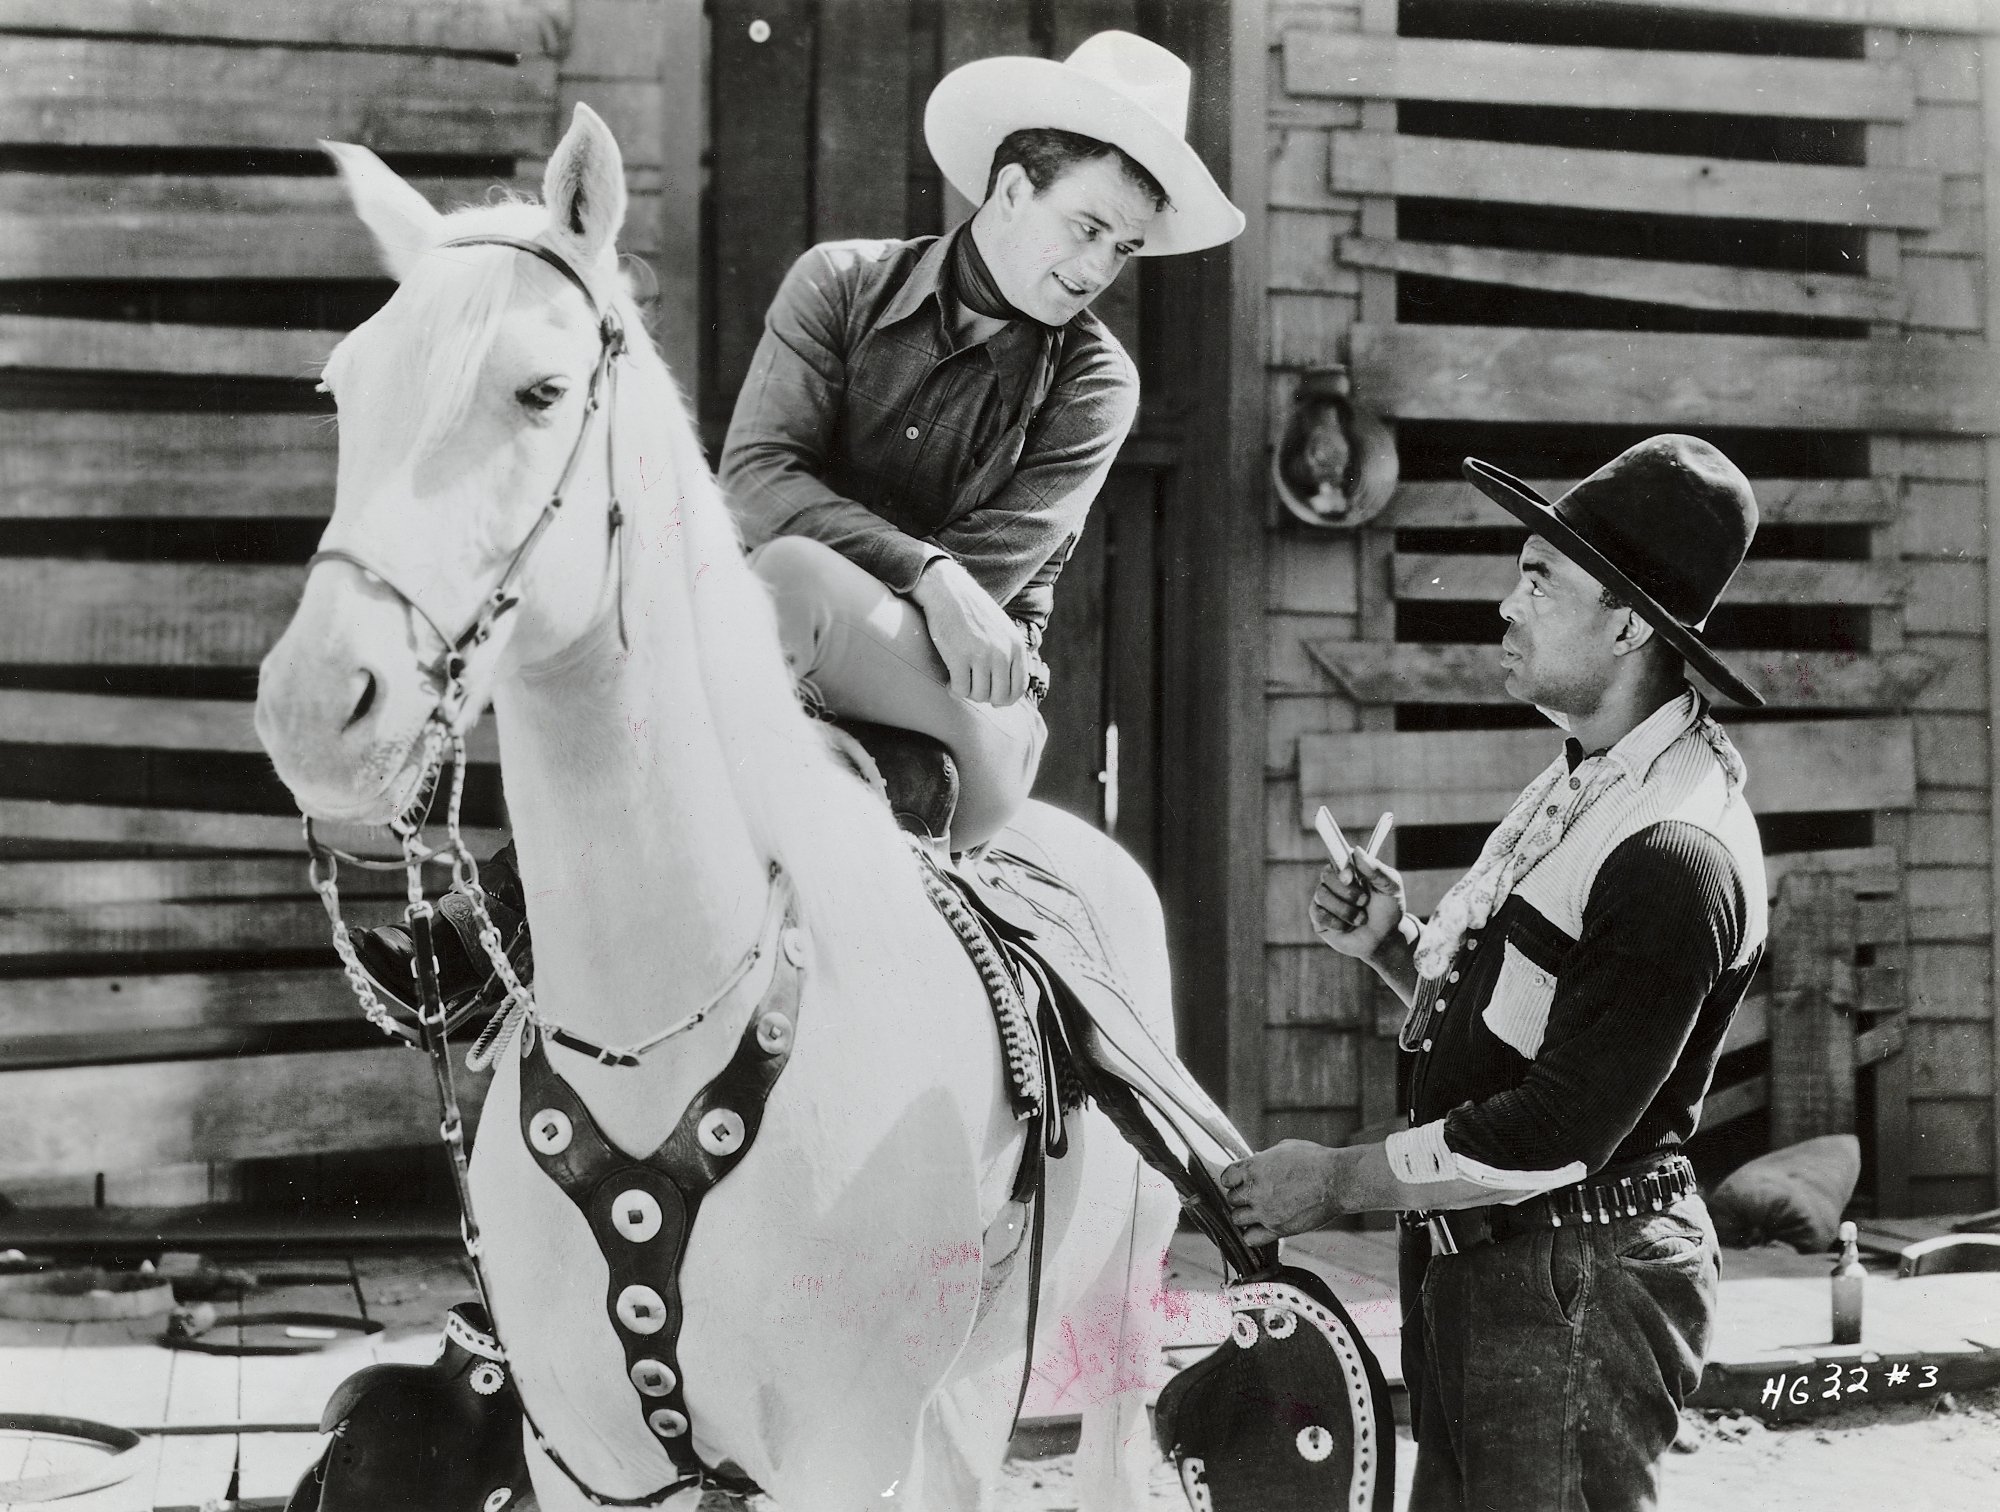 'Haunted Gold' John Wayne as John Mason in horror movie. Wayne is sitting on top of a white horse wearing a cowboy outfit, talking to another cowboy in uniform.